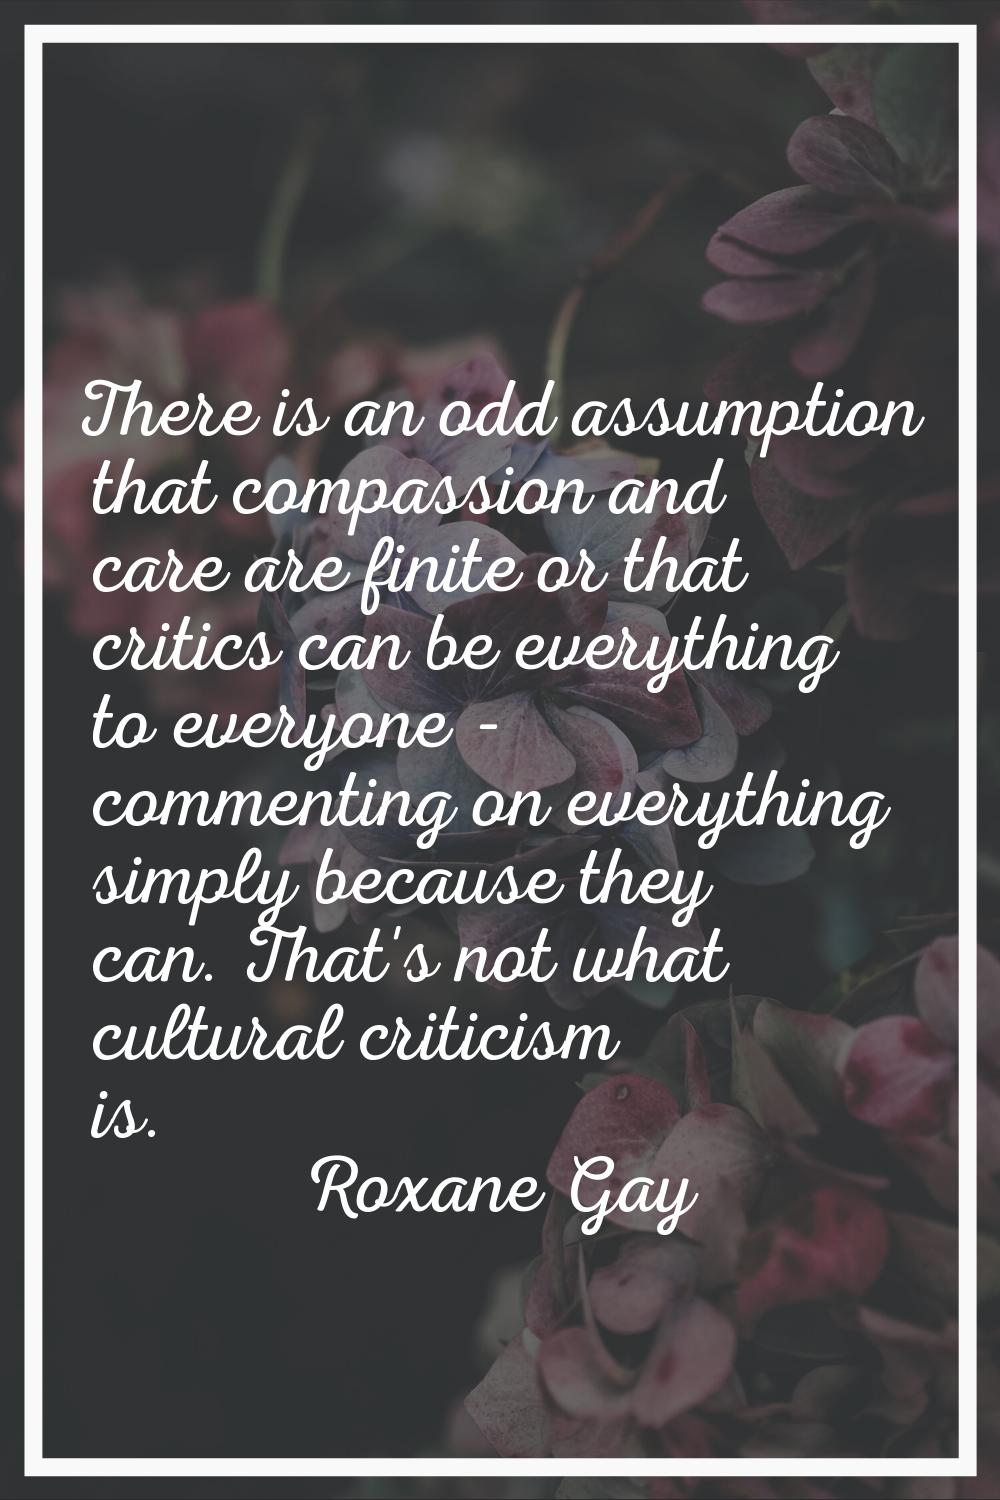 There is an odd assumption that compassion and care are finite or that critics can be everything to